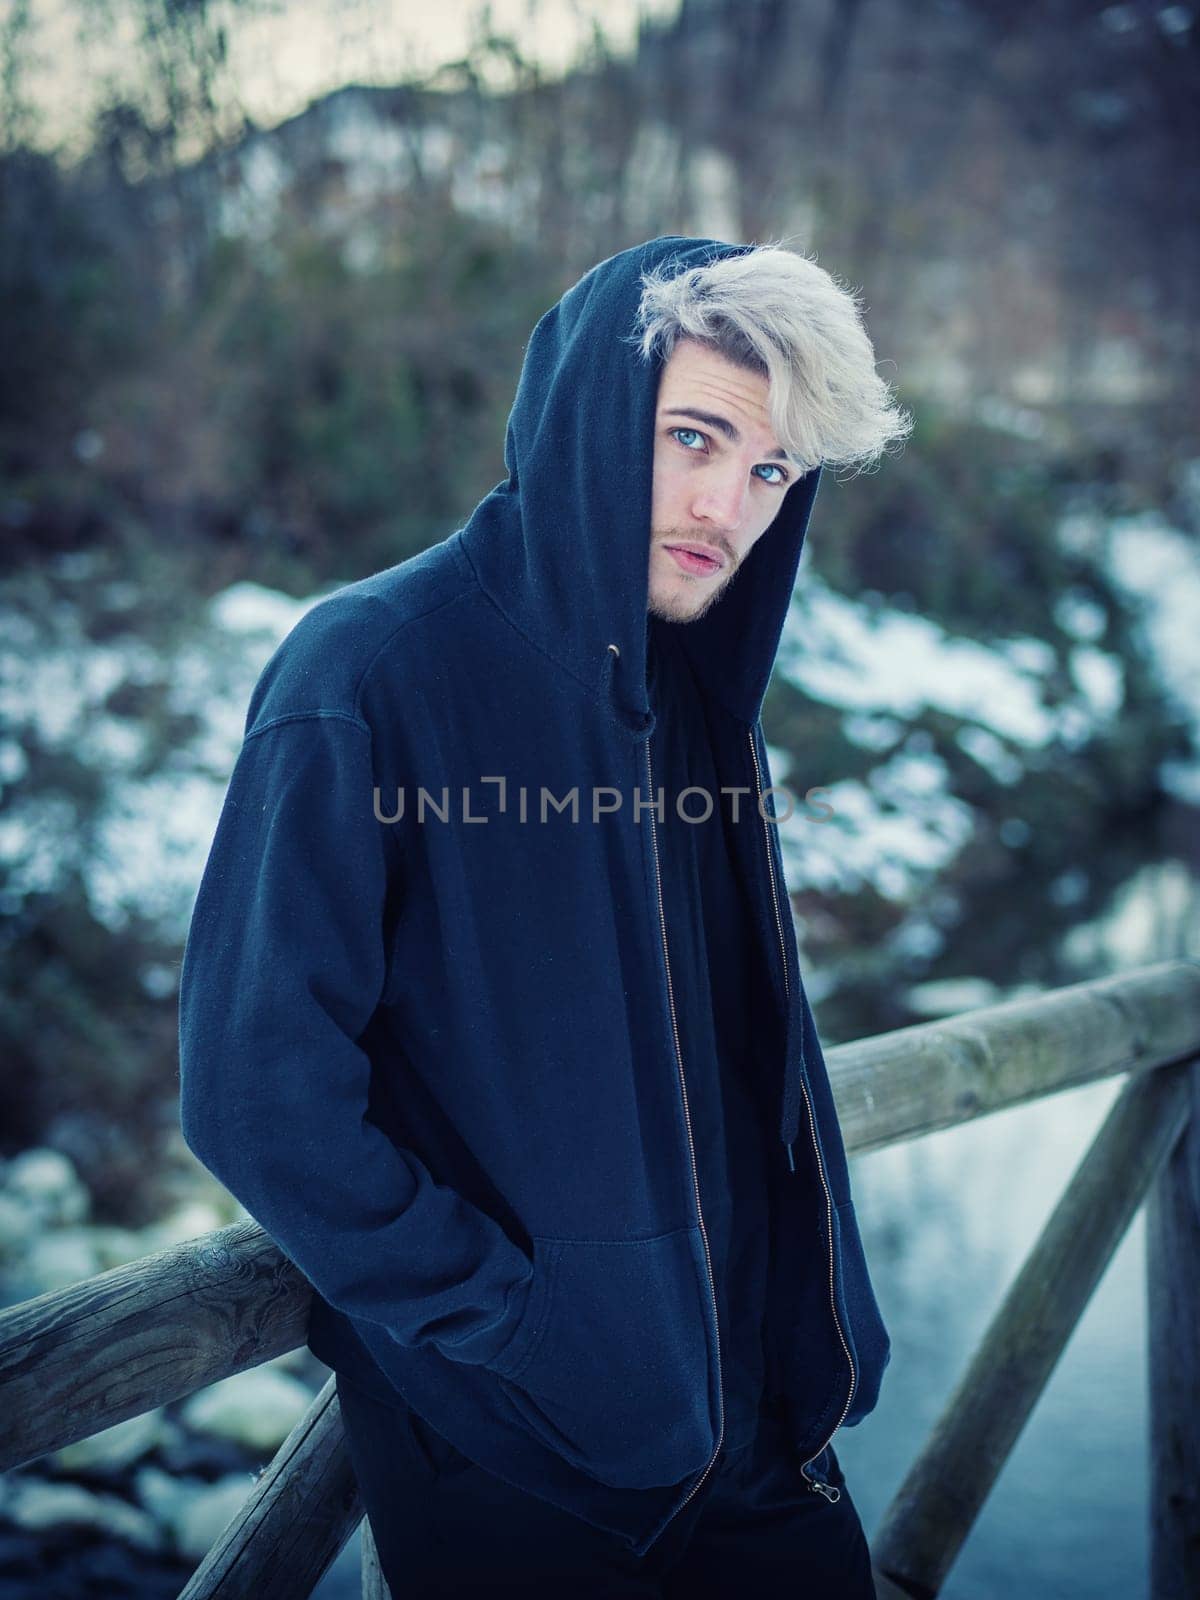 Portrait of young man in hoodie posing outdoor in winter setting with snow all around, looking at camera